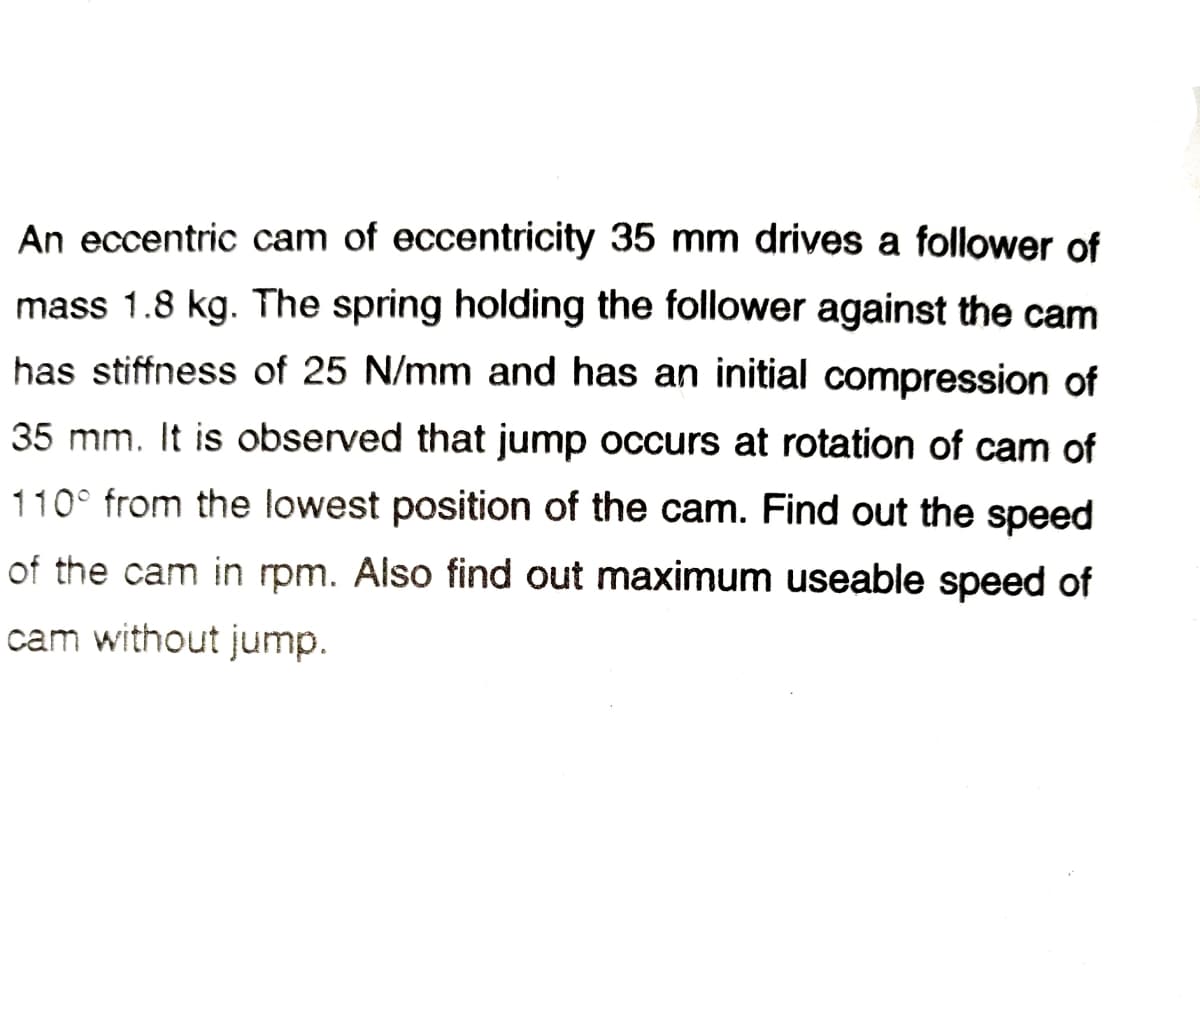 An eccentric cam of eccentricity 35 mm drives a follower of
mass 1.8 kg. The spring holding the follower against the cam
has stiffness of 25 N/mm and has an initial compression of
35 mm. It is observed that jump occurs at rotation of cam of
110° from the lowest position of the cam. Find out the speed
of the cam in rpm. Also find out maximum useable speed of
cam without jump.
